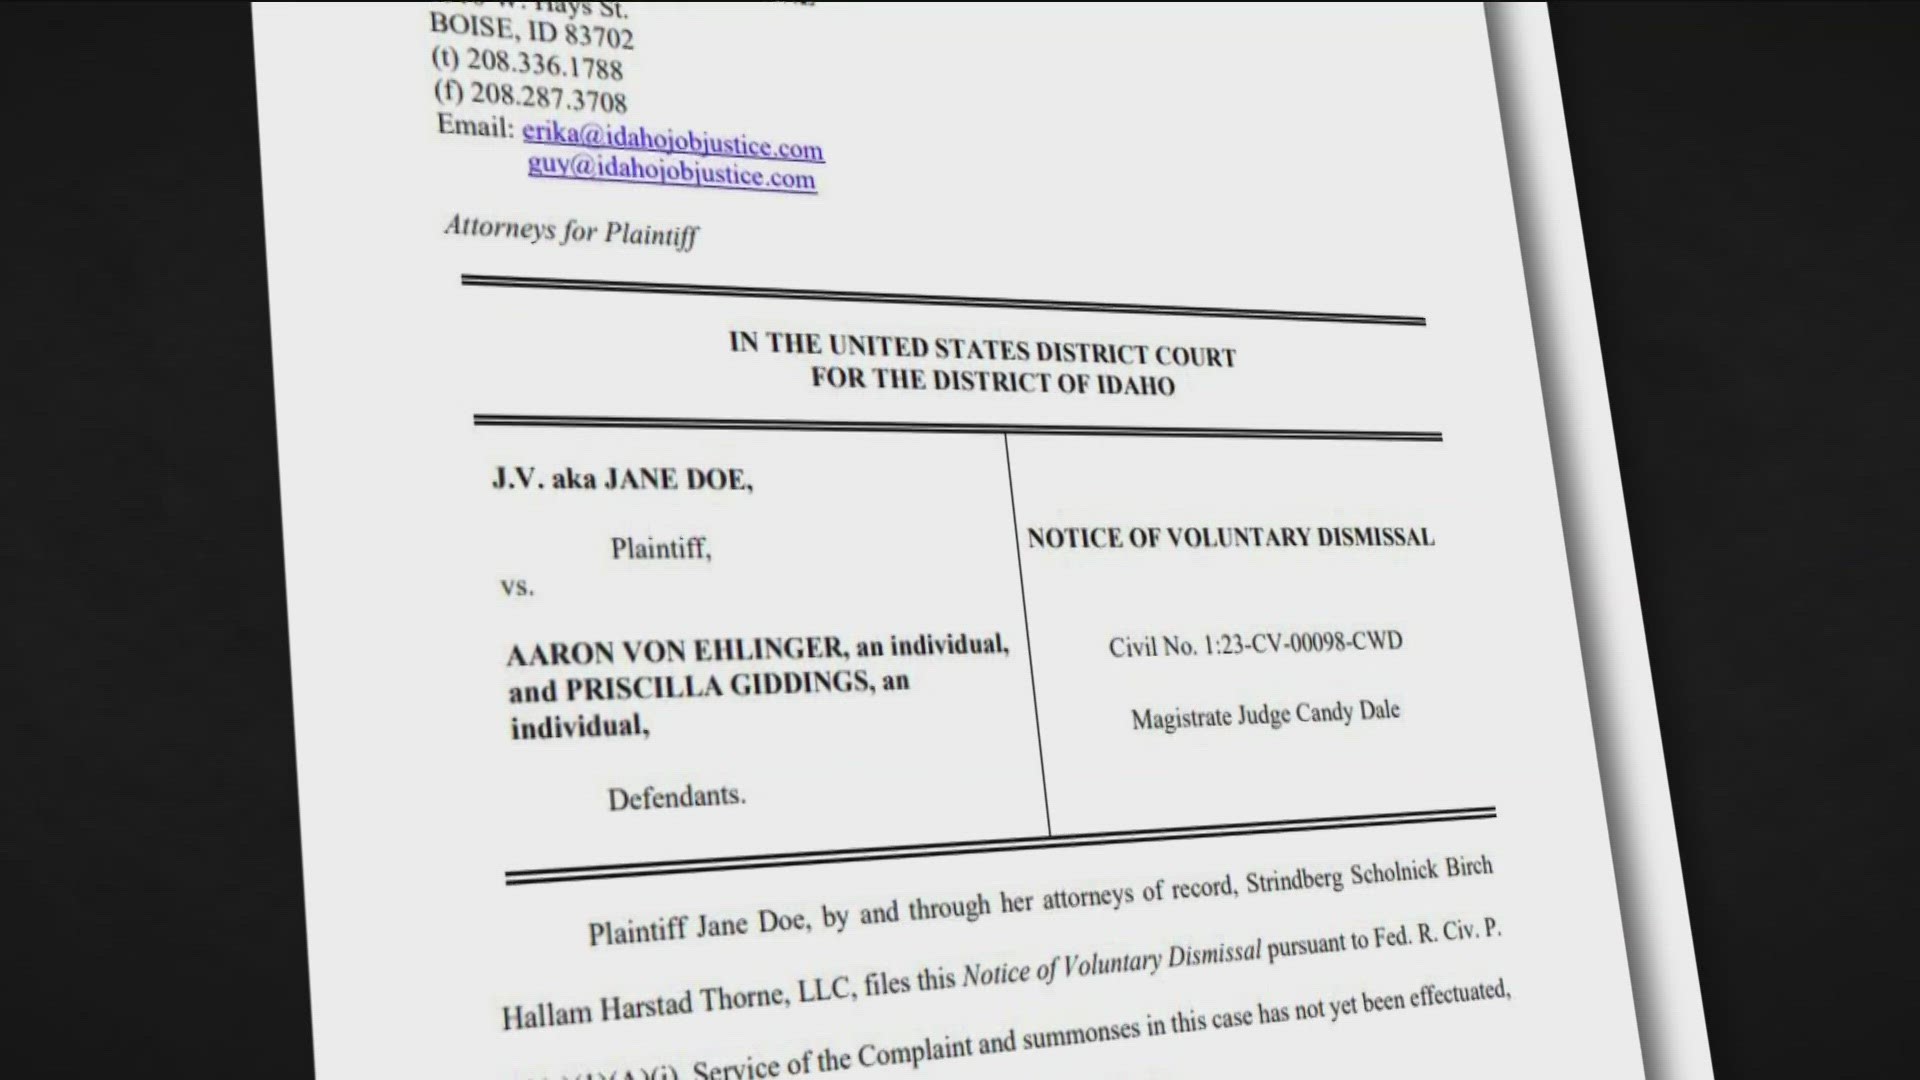 Jane Doe dismissed her lawsuit against Aaron von Ehlinger and Priscilla Giddings because she does not want to experience any more harassment, she said.